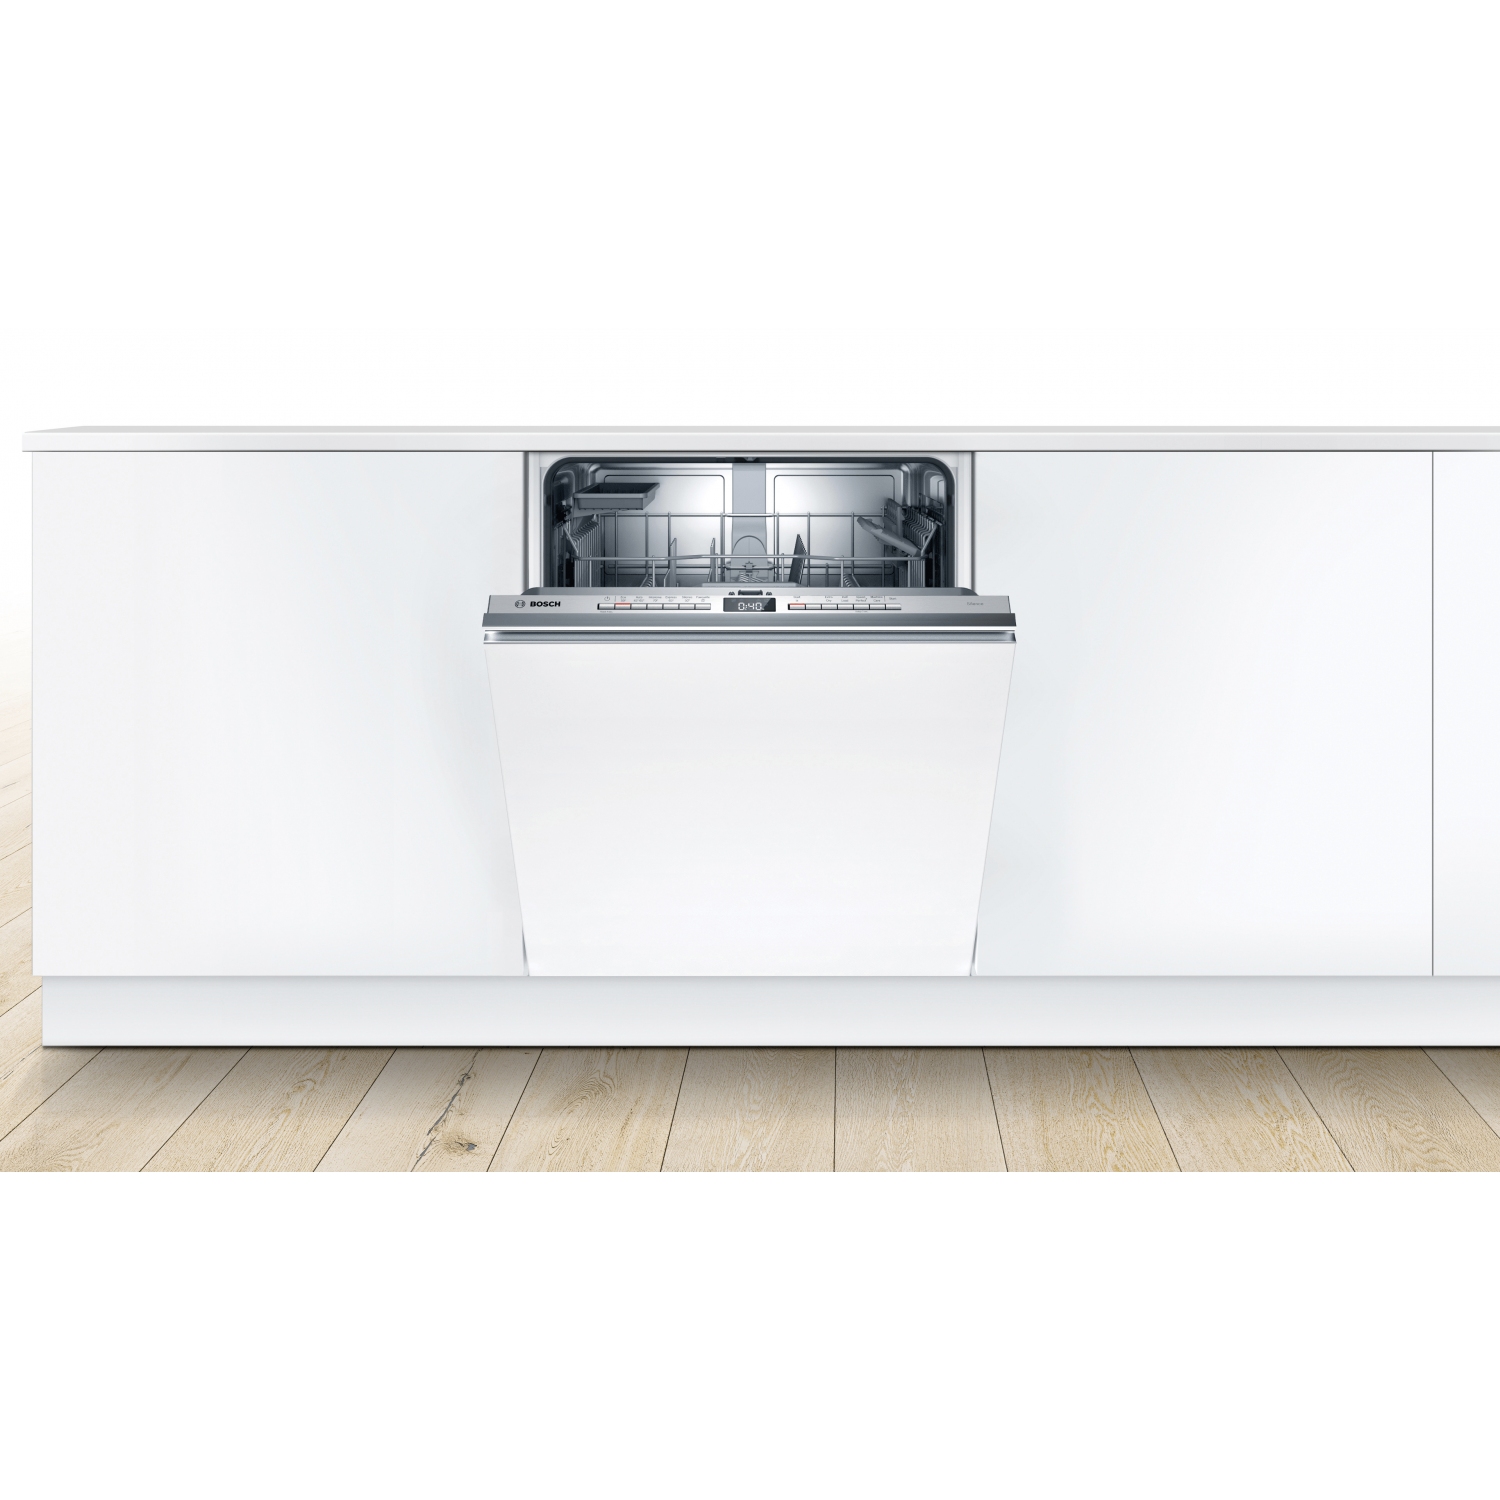 Bosch SGV4HAX40G Full Size Integrated Dishwasher - Steel - 13 Place Settings - 1